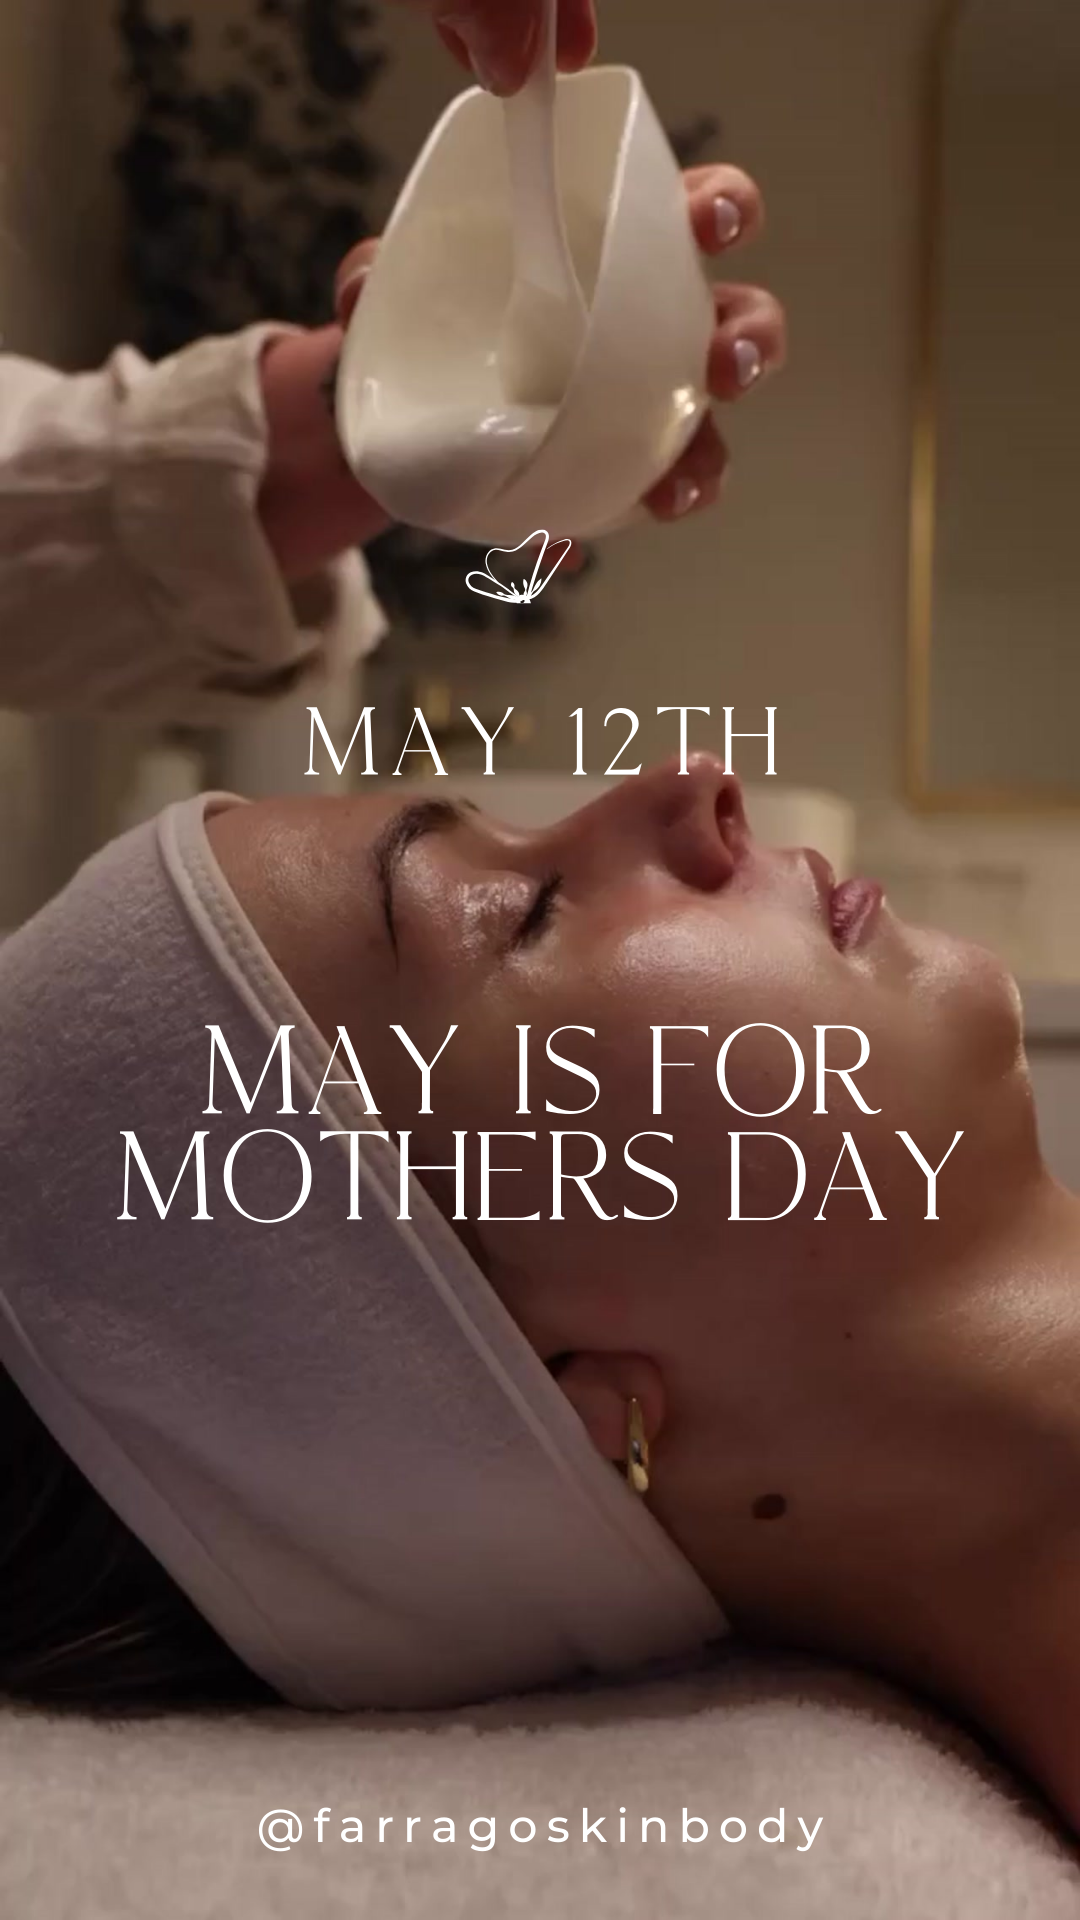 Mother Day Farrago Skin Experience